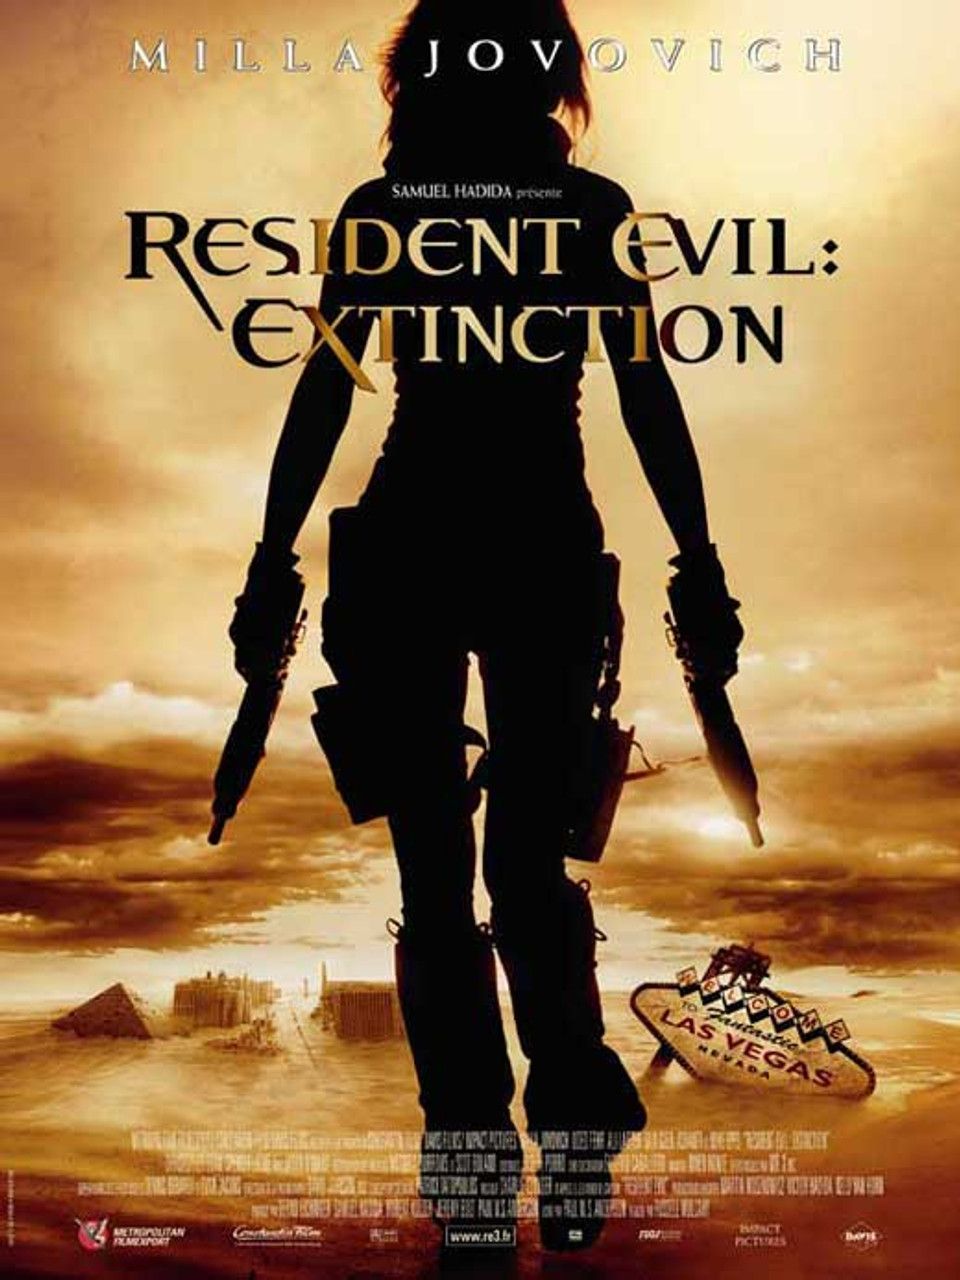  Resident Evil: The High-Definition Trilogy (Resident Evil / Resident  Evil: Apocalypse / Resident Evil: Extinction) : Milla Jovovich, Michelle  Rodriguez, Ali Larter, Oded Fehr, Sienna Guillory, Eric Mabius, James  Purefoy, Martin